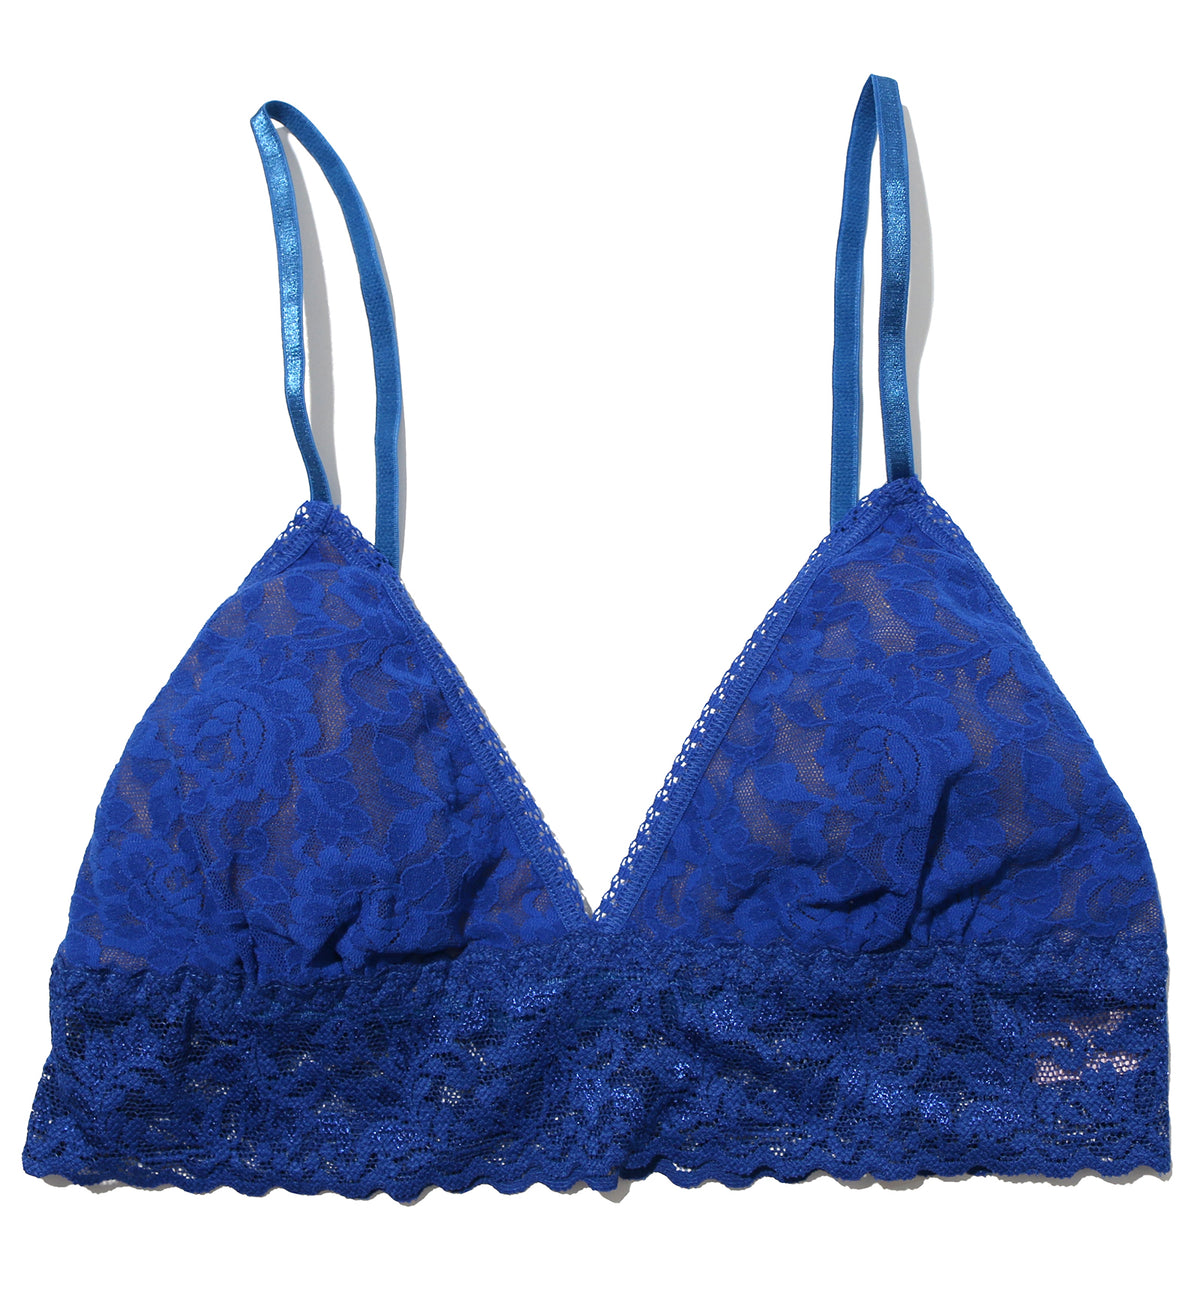 Hanky Panky Signature Lace Padded Triangle Bralette (487004),XS,Cobalt - Cobalt,XS